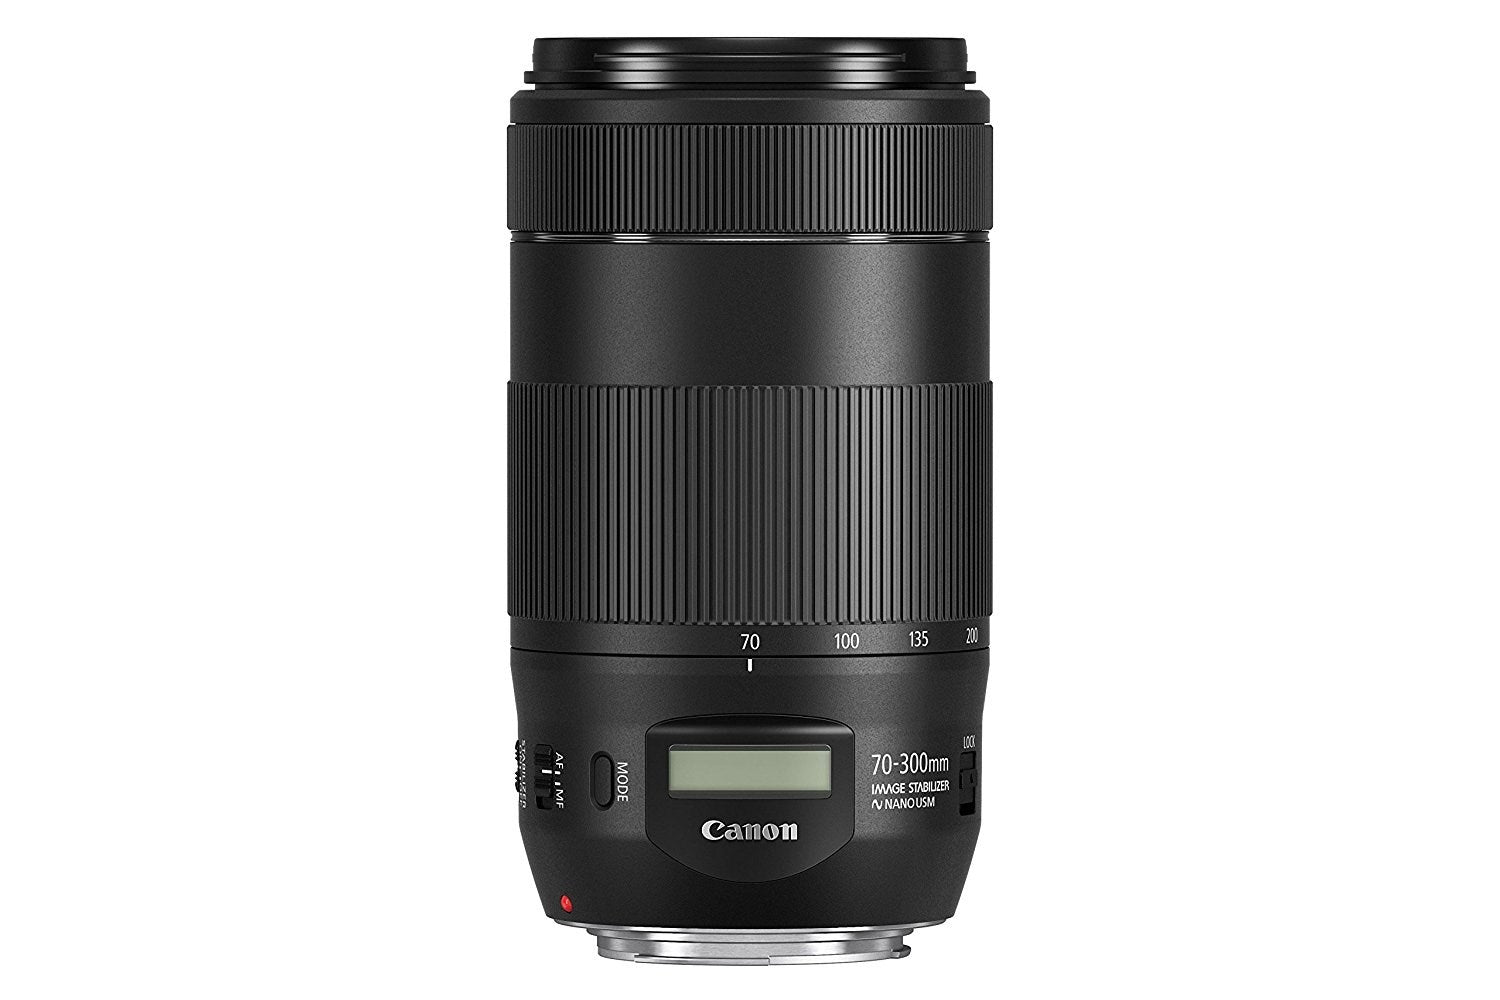 Canon EF 70-300mm F4-5.6 IS II USM Telephoto Zoom Image Stabilised Camera Lens - Product Photo 1 - Stand Up View